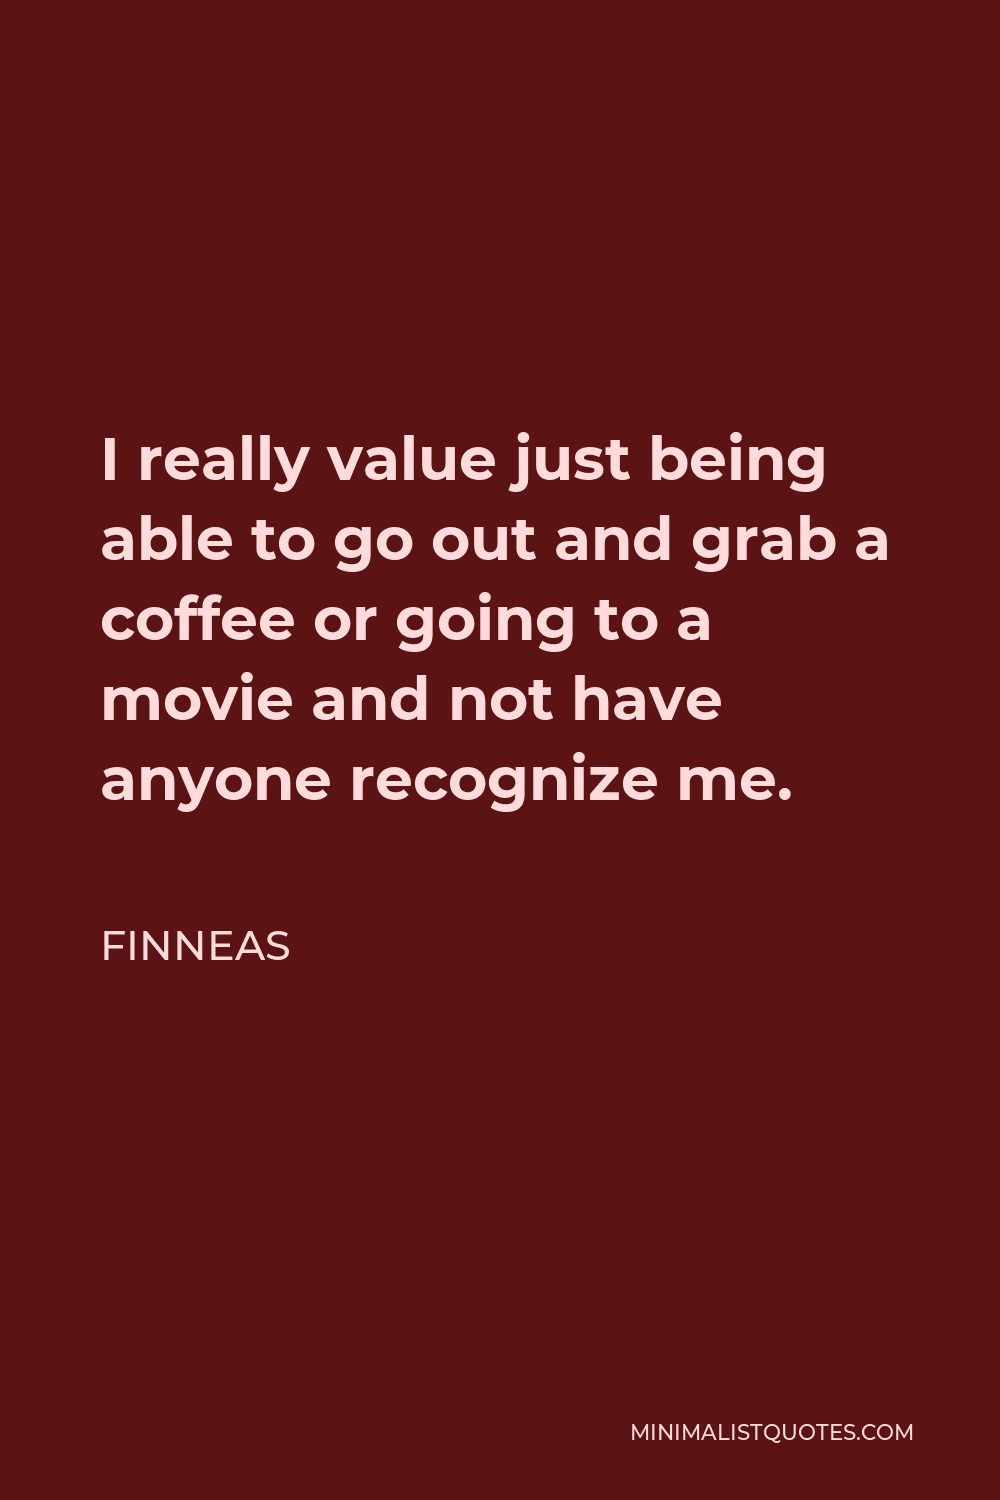 Finneas Quote - I really value just being able to go out and grab a coffee or going to a movie and not have anyone recognize me.